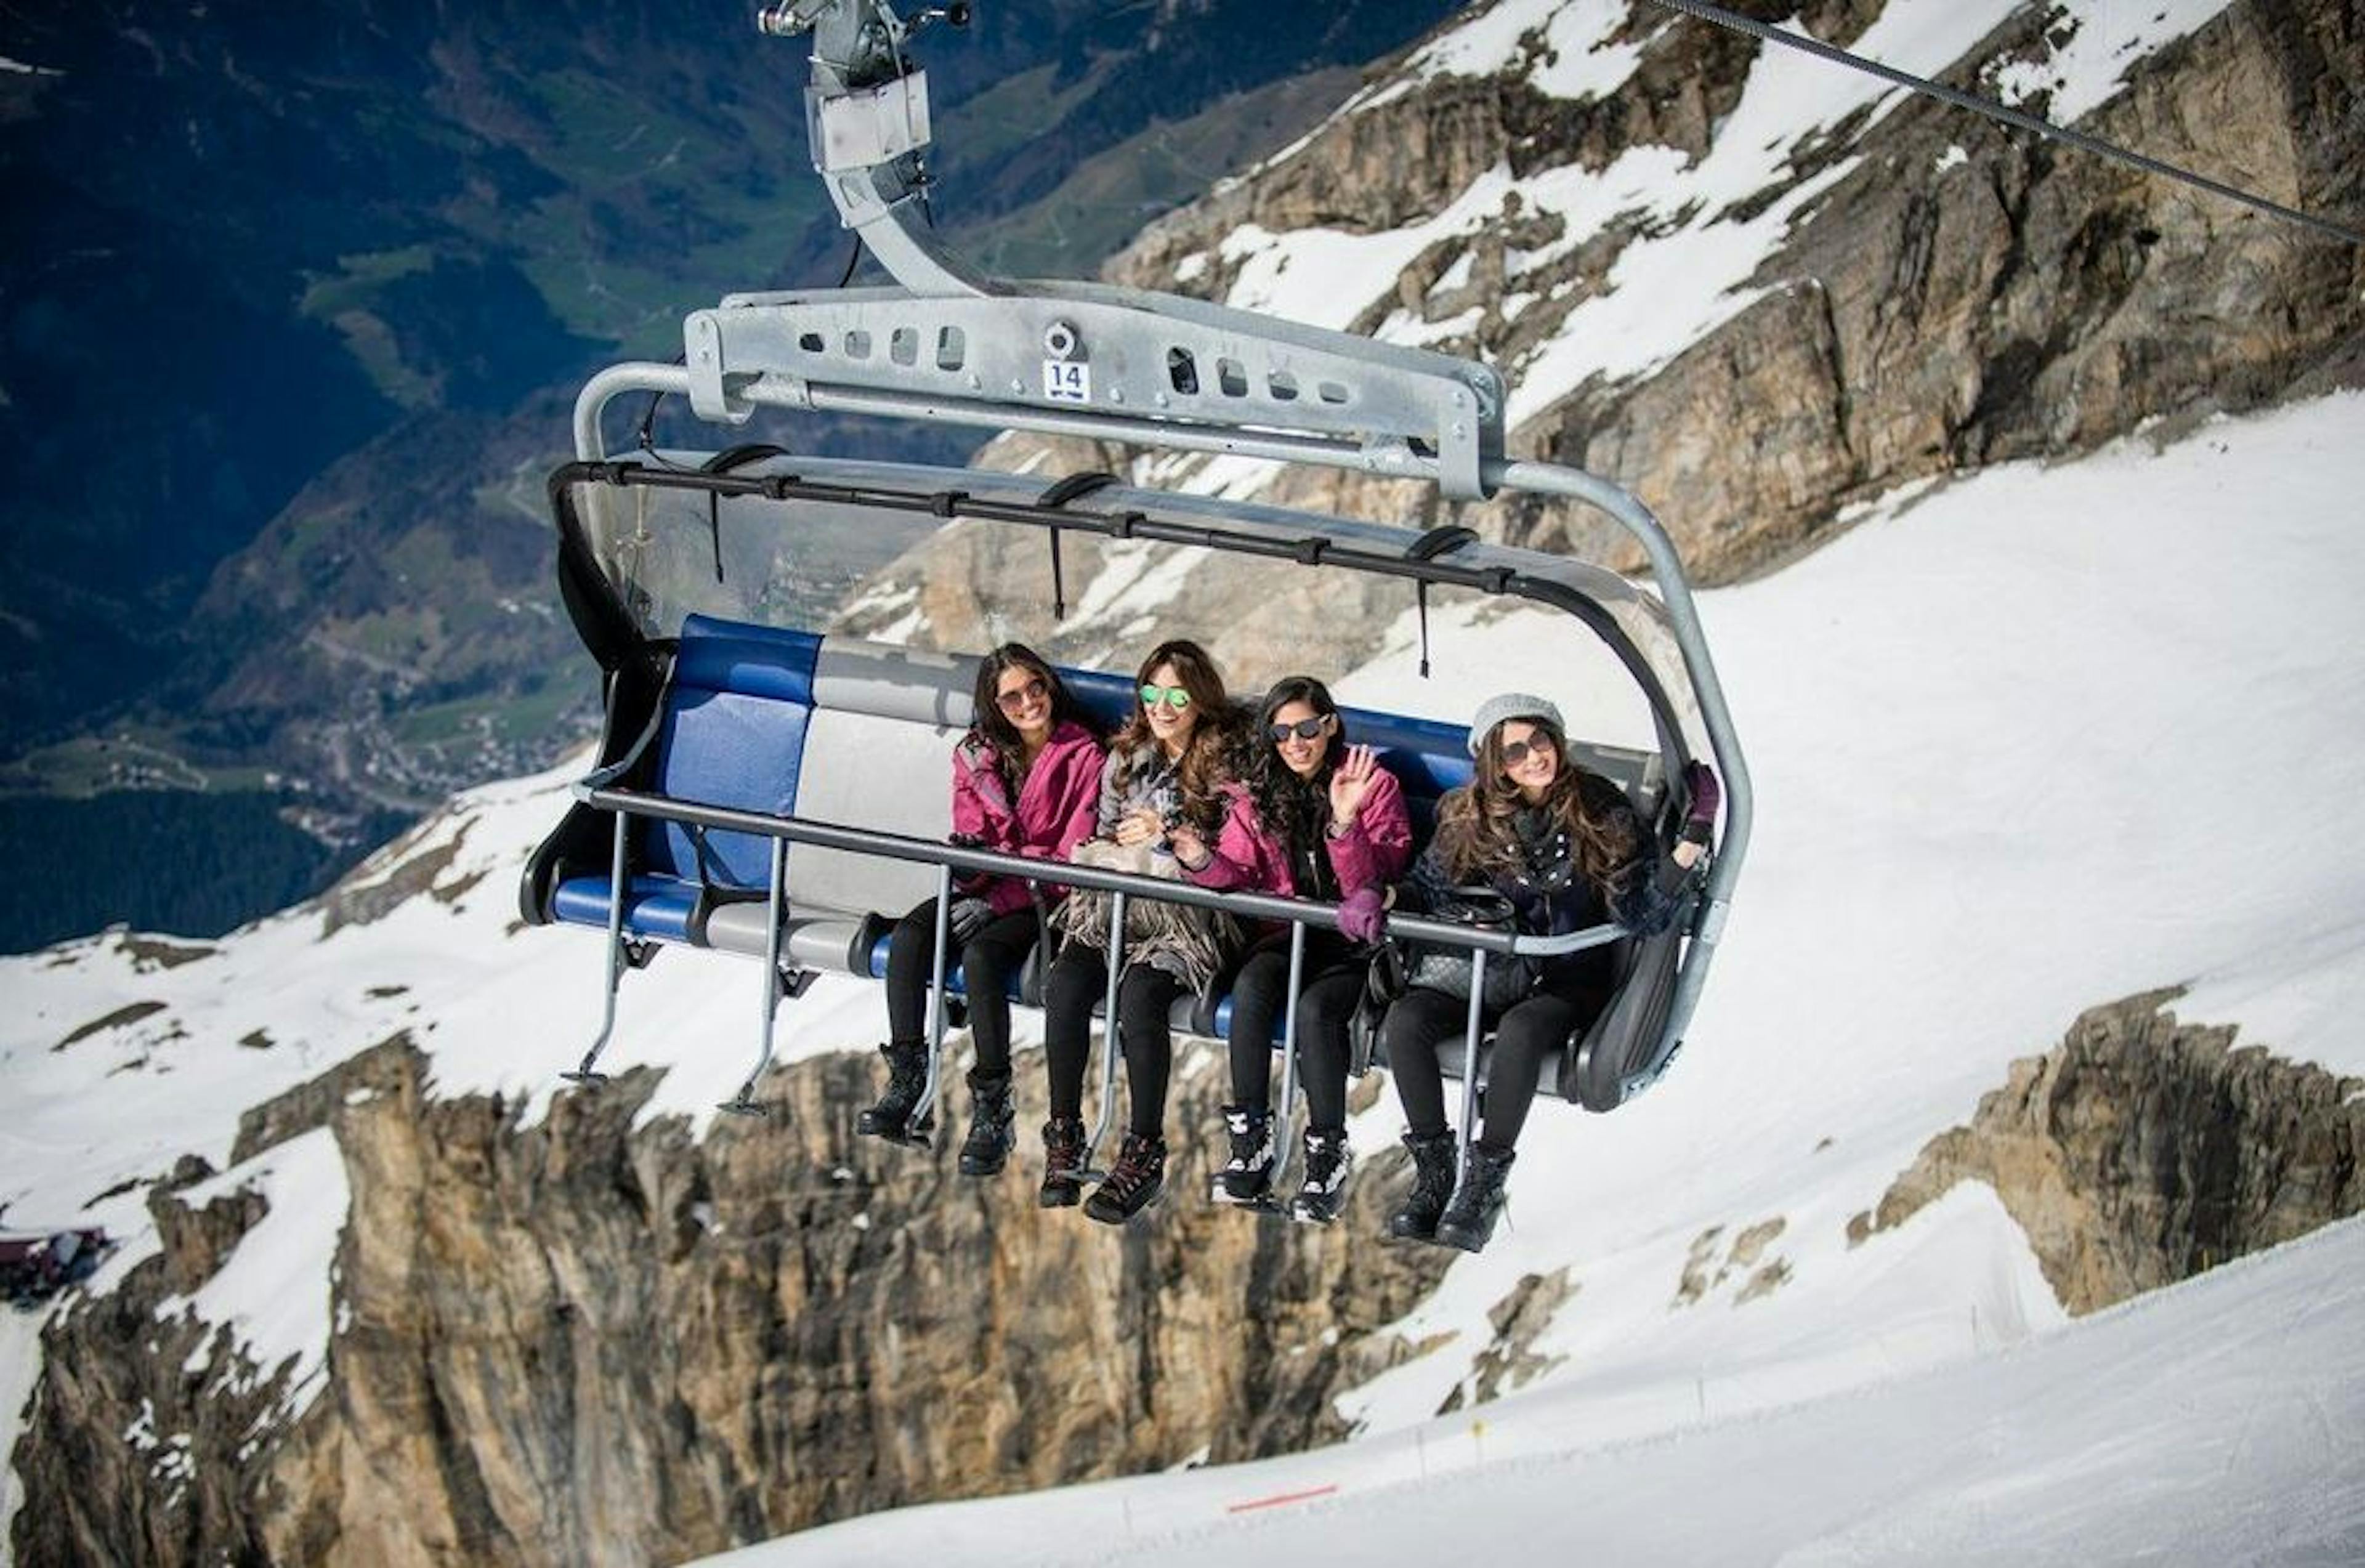 Titlis excursion from Lucerne